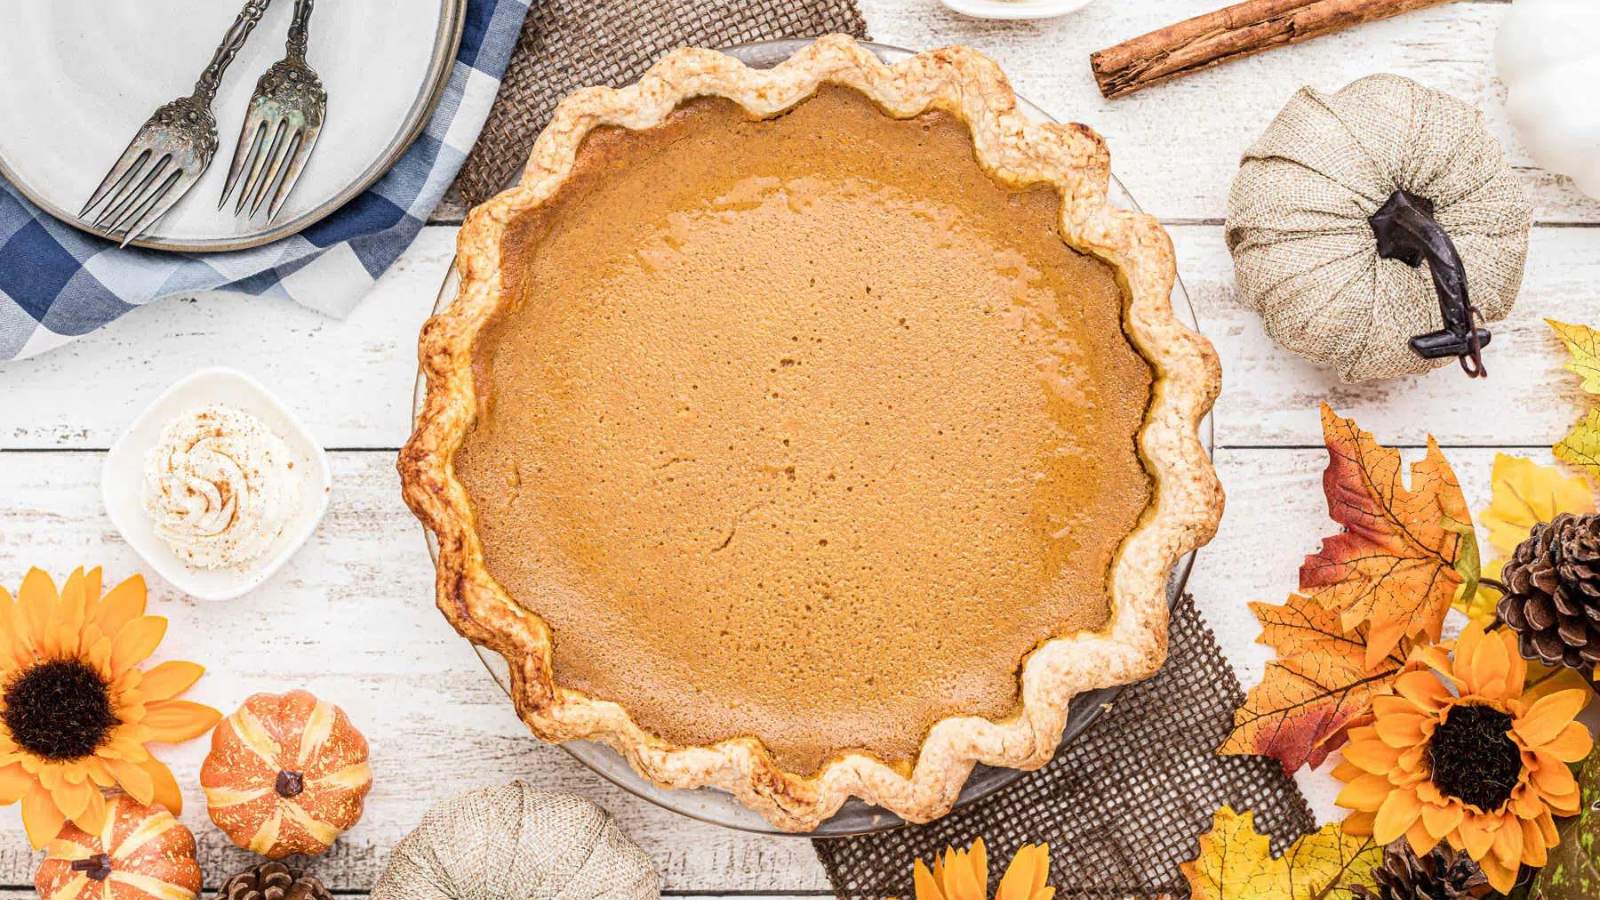 Amish Pumpkin Pie Recipe by The Cagle Diaries.